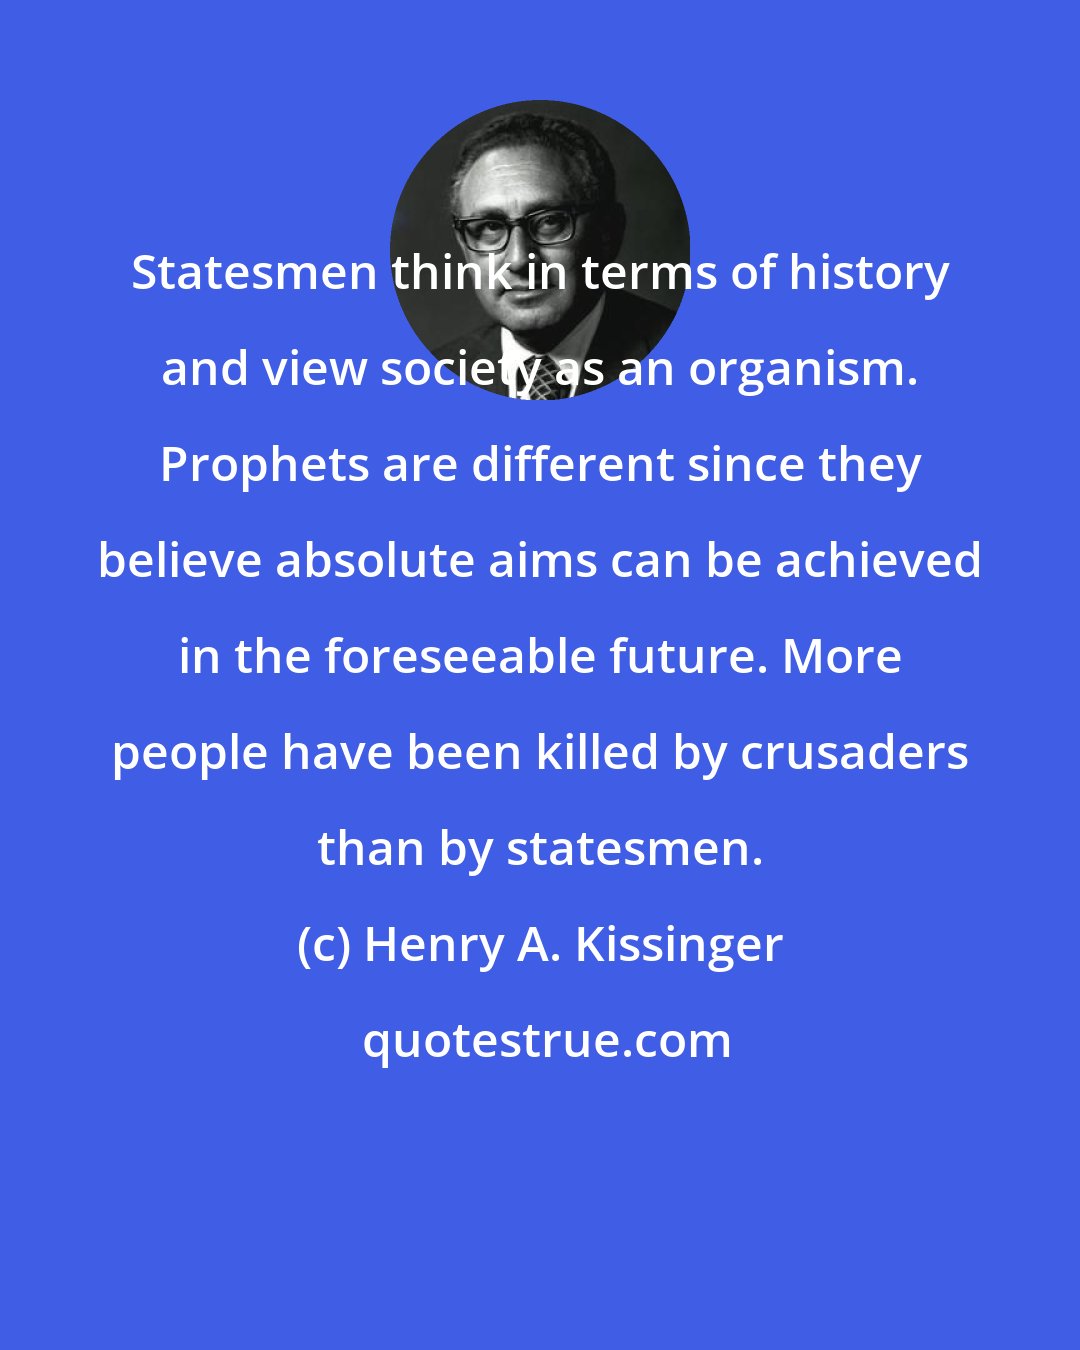 Henry A. Kissinger: Statesmen think in terms of history and view society as an organism. Prophets are different since they believe absolute aims can be achieved in the foreseeable future. More people have been killed by crusaders than by statesmen.